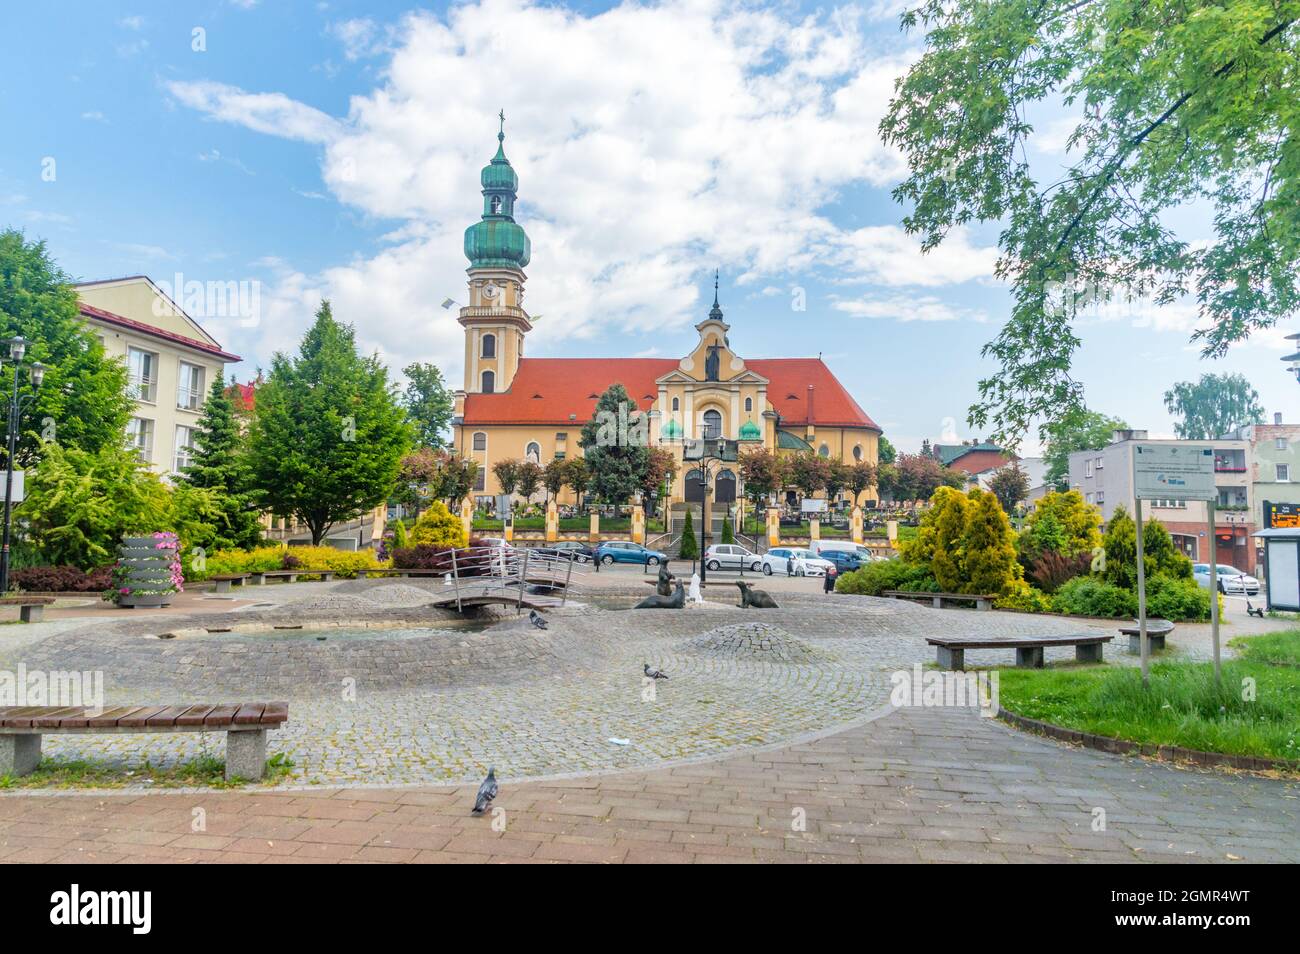 Tychy, Poland - June 5, 2021: Market square with fountain with Otters and St. Mary Magdalene church in background. Stock Photo